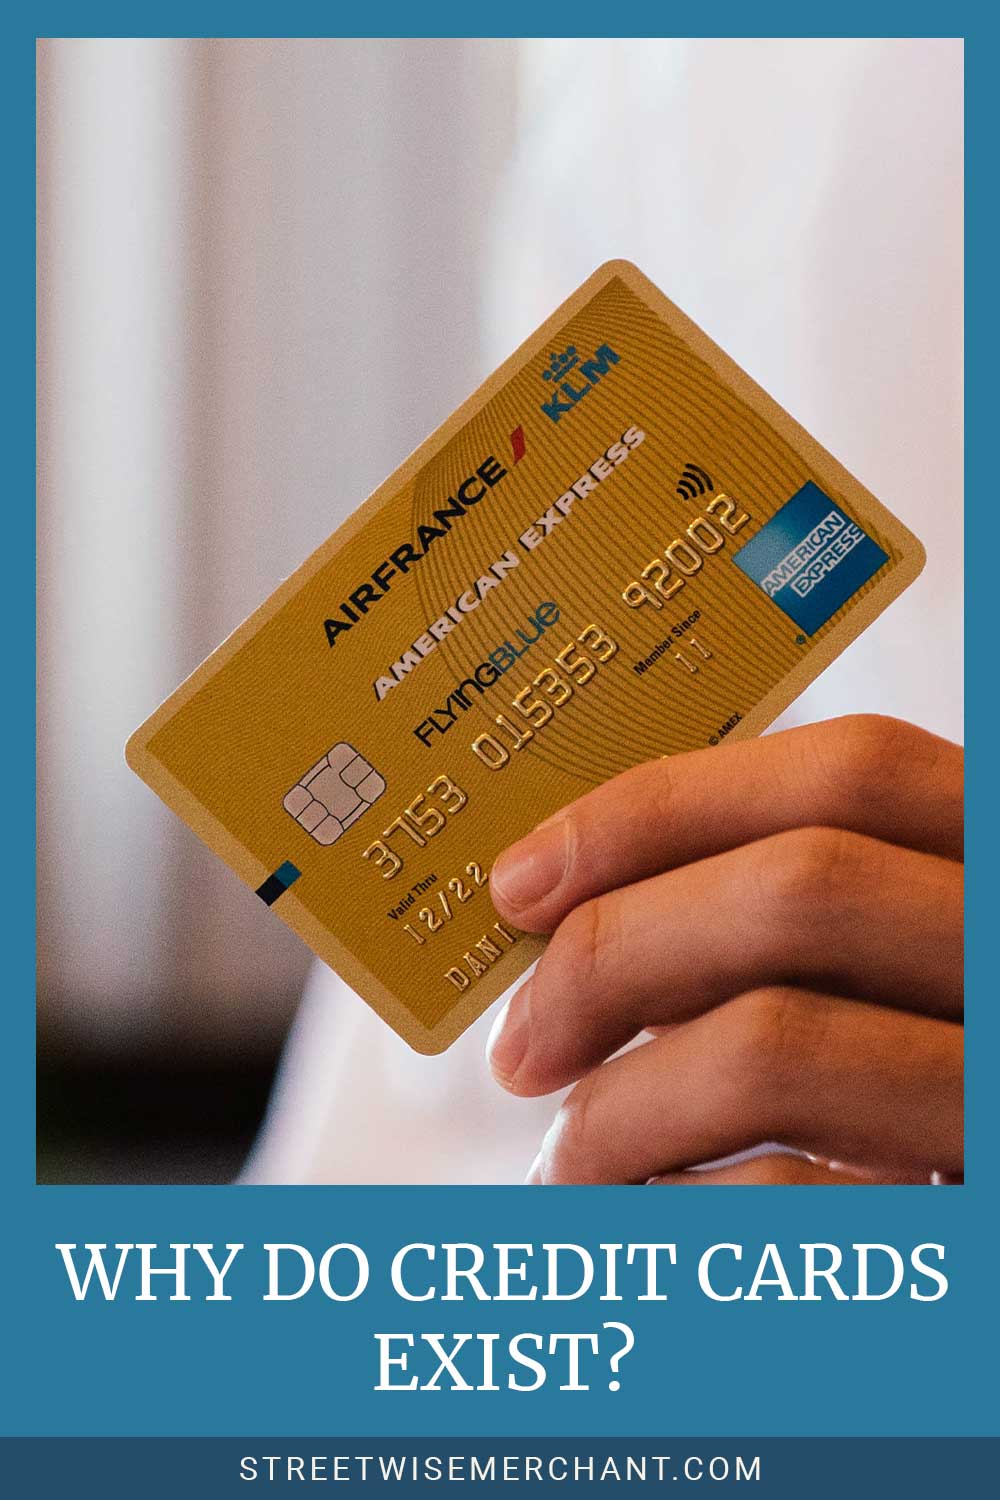 Man holding a card with his fingure - Why Do Credit Cards Exist?